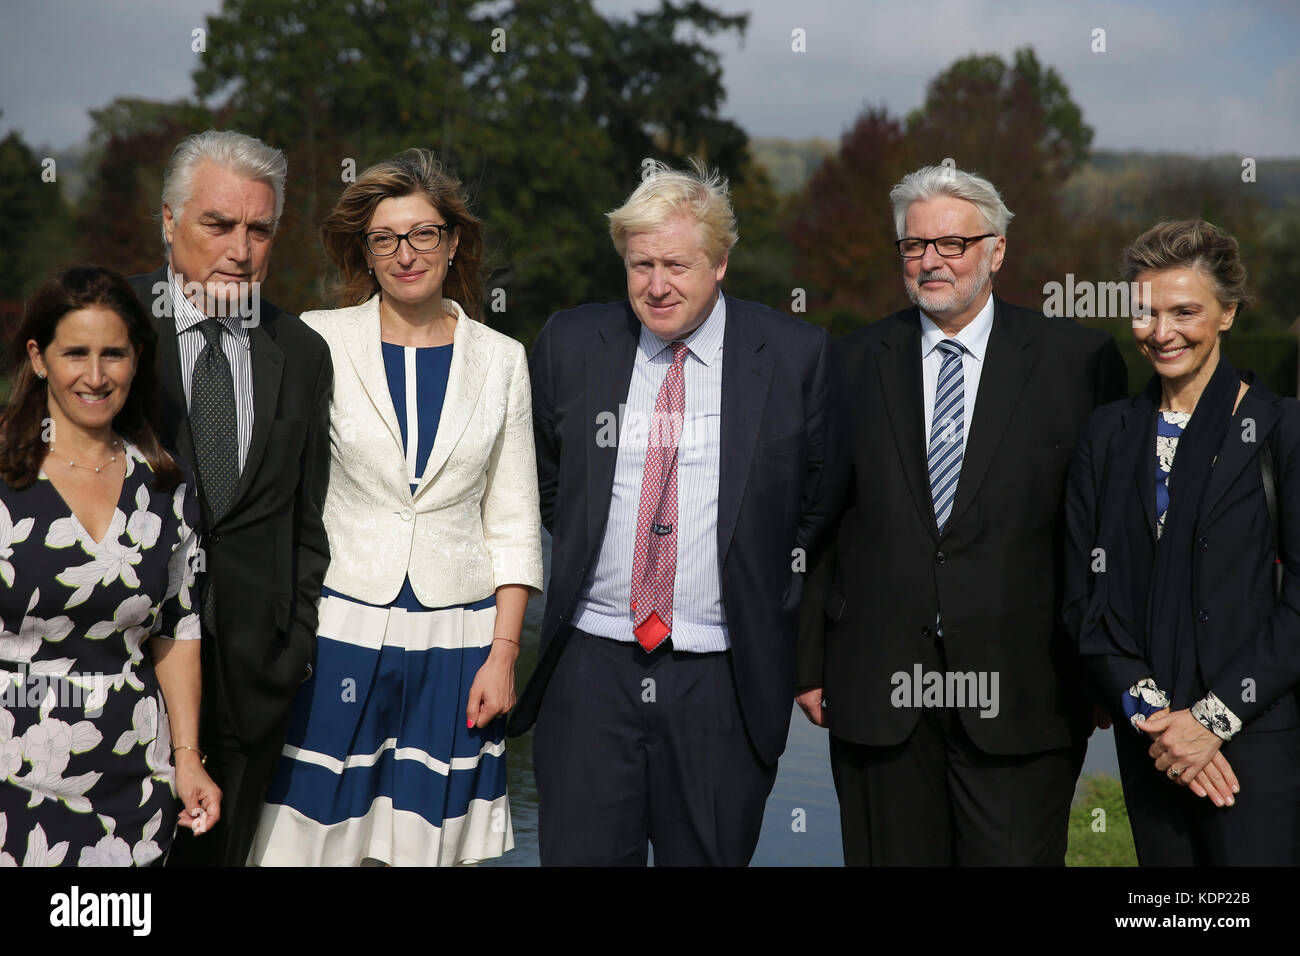 (left to right) Lawyer and Johnson's wife Marina Wheeler, Slovenia's State Secretary at the Ministry of Foreign Affairs Andrej Logar, Bulgaria's Foreign Minister Ekaterina Zakharieva, Foreign Secretary Boris Johnson, Poland's Foreign Minister Witold Waszczykowski and Croatia's Deputy Prime Minister and Foreign Minister Marija Pejcinovic Buric in the grounds as Johnson hosts a lunch with European Foreign Ministers at his official residence, Chevening House, in Sevenoaks, Kent. Stock Photo